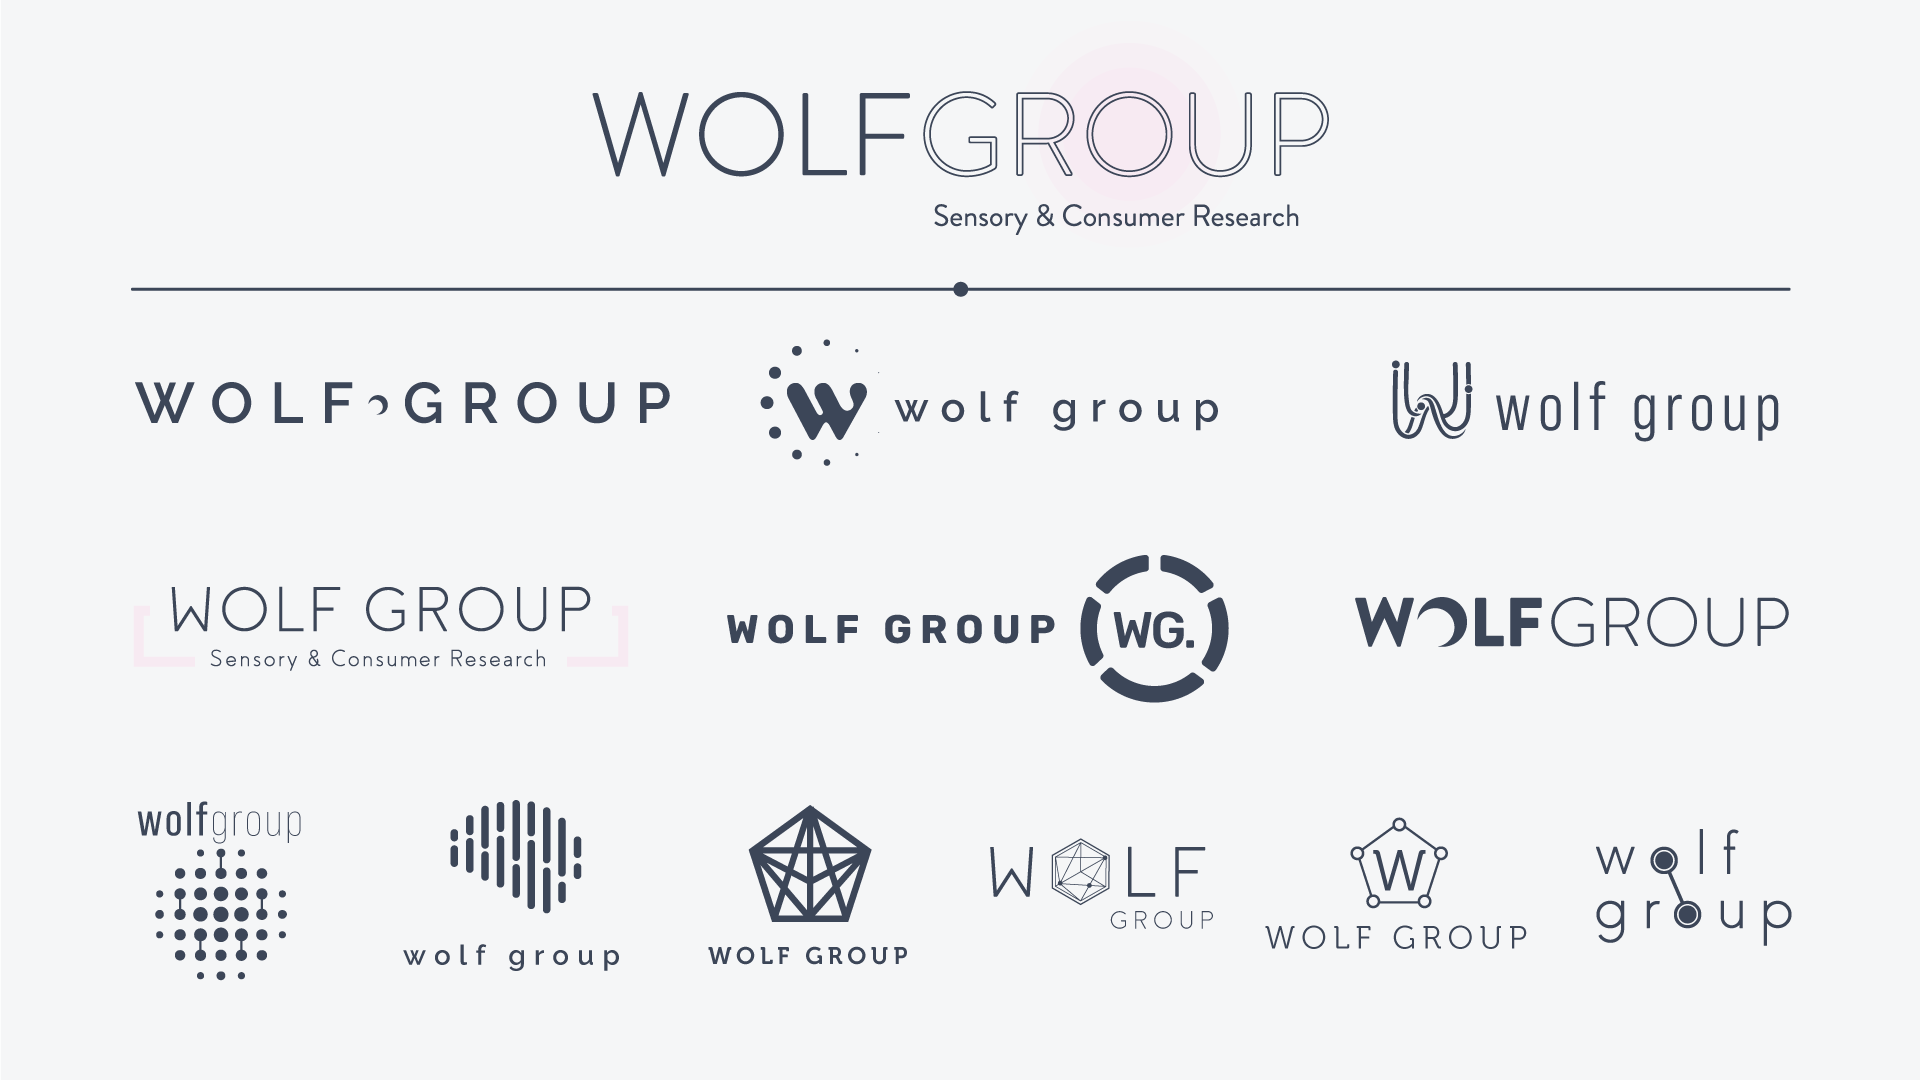 A spread showing some of the logo ideations for Wolf Group.